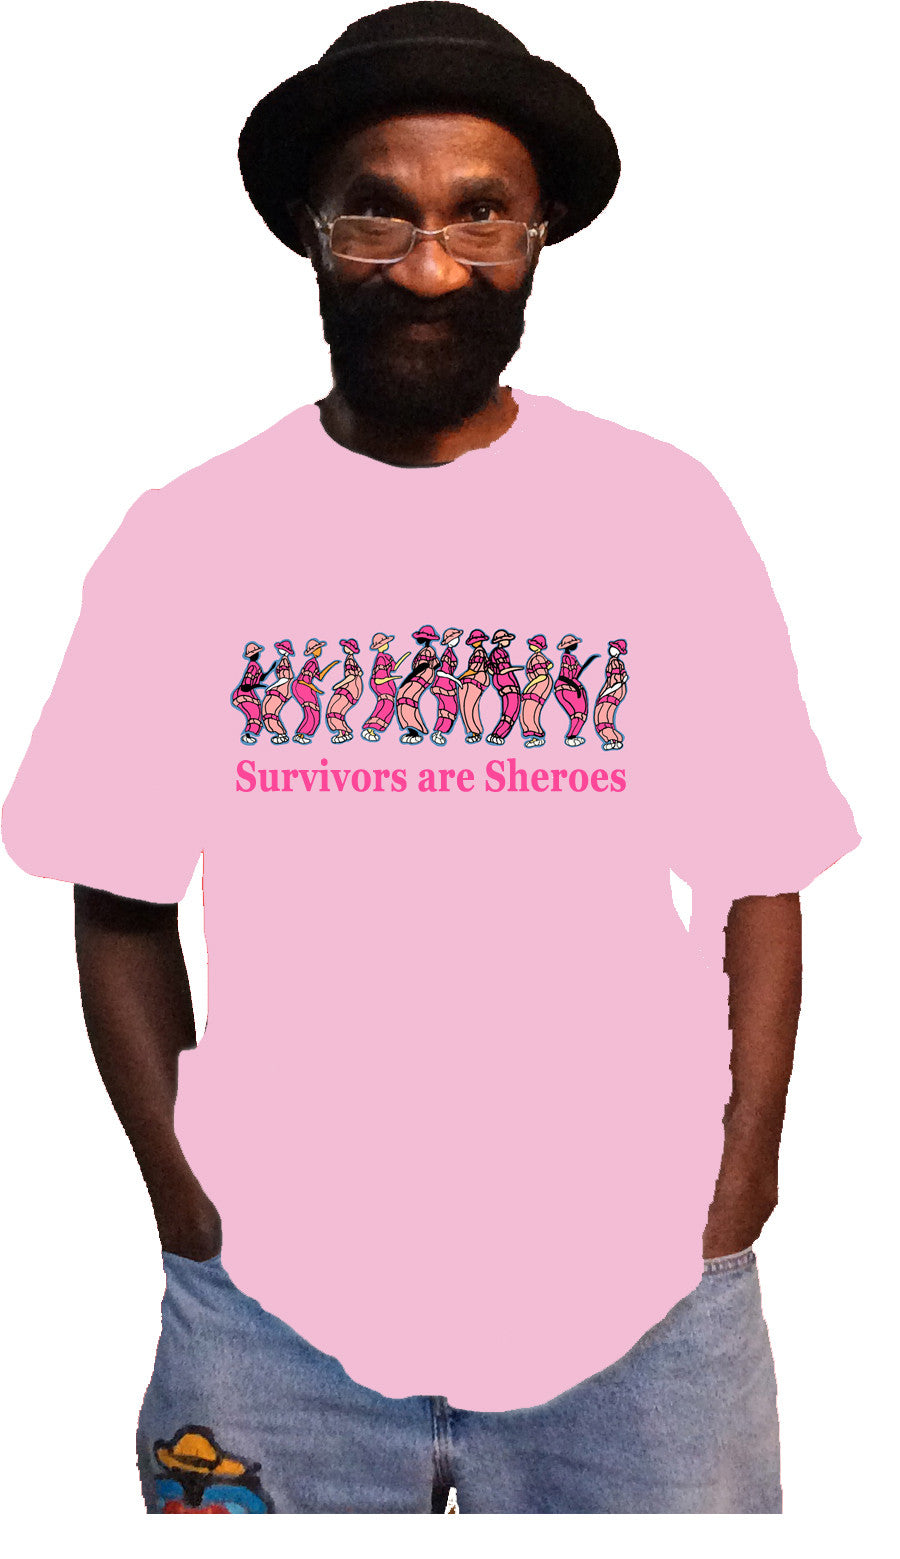 Survivors are Sheroes